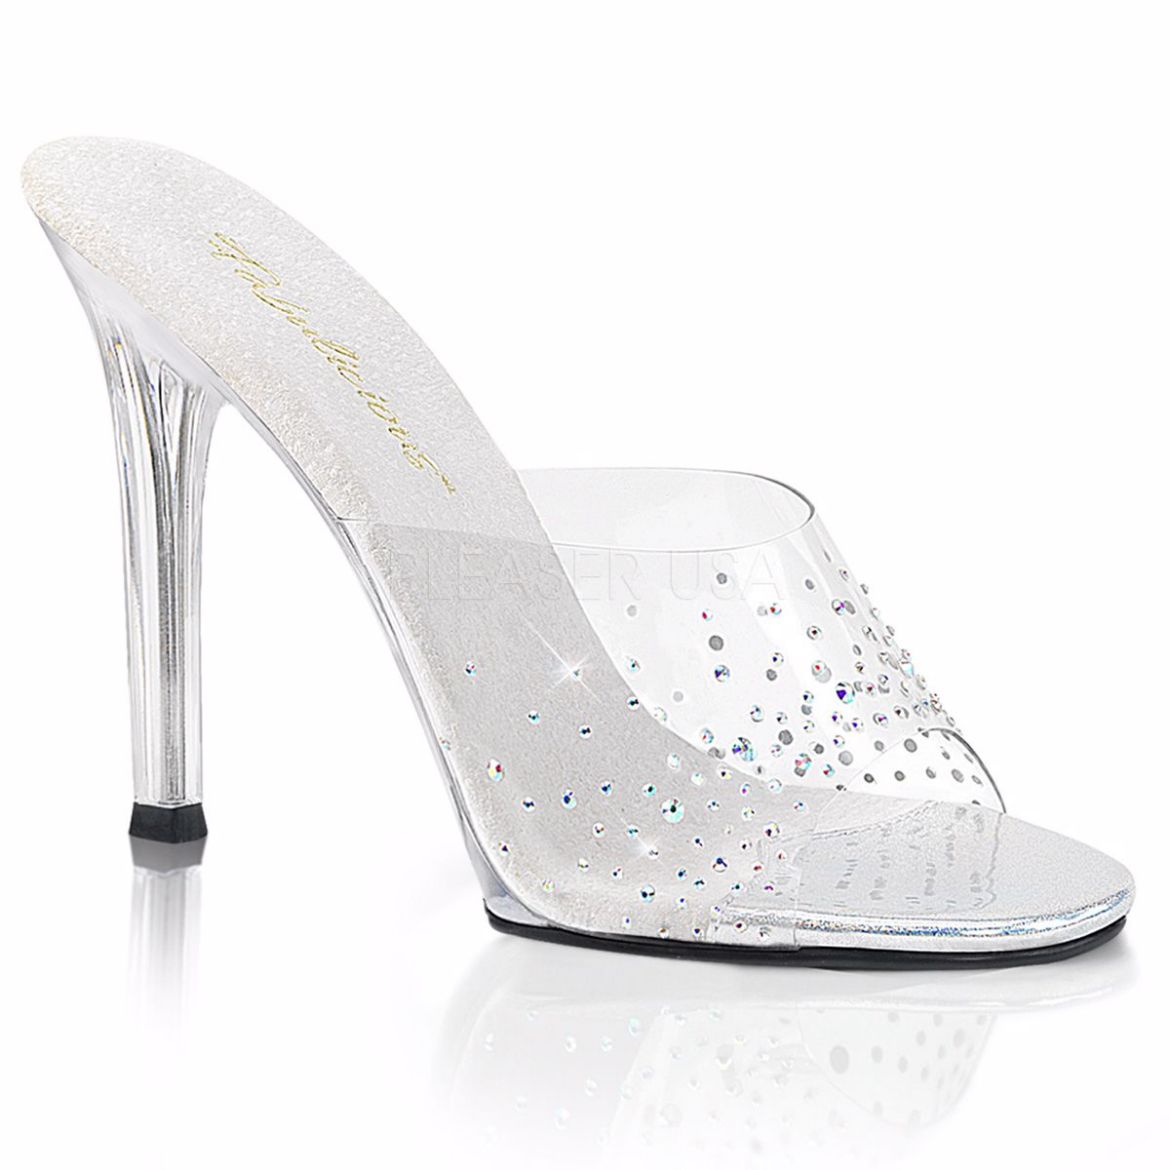 Product image of Fabulicious Gala-01Sd Clear/Clear, 4 1/2 inch (11.4 cm) Heel Slide Mule Shoes